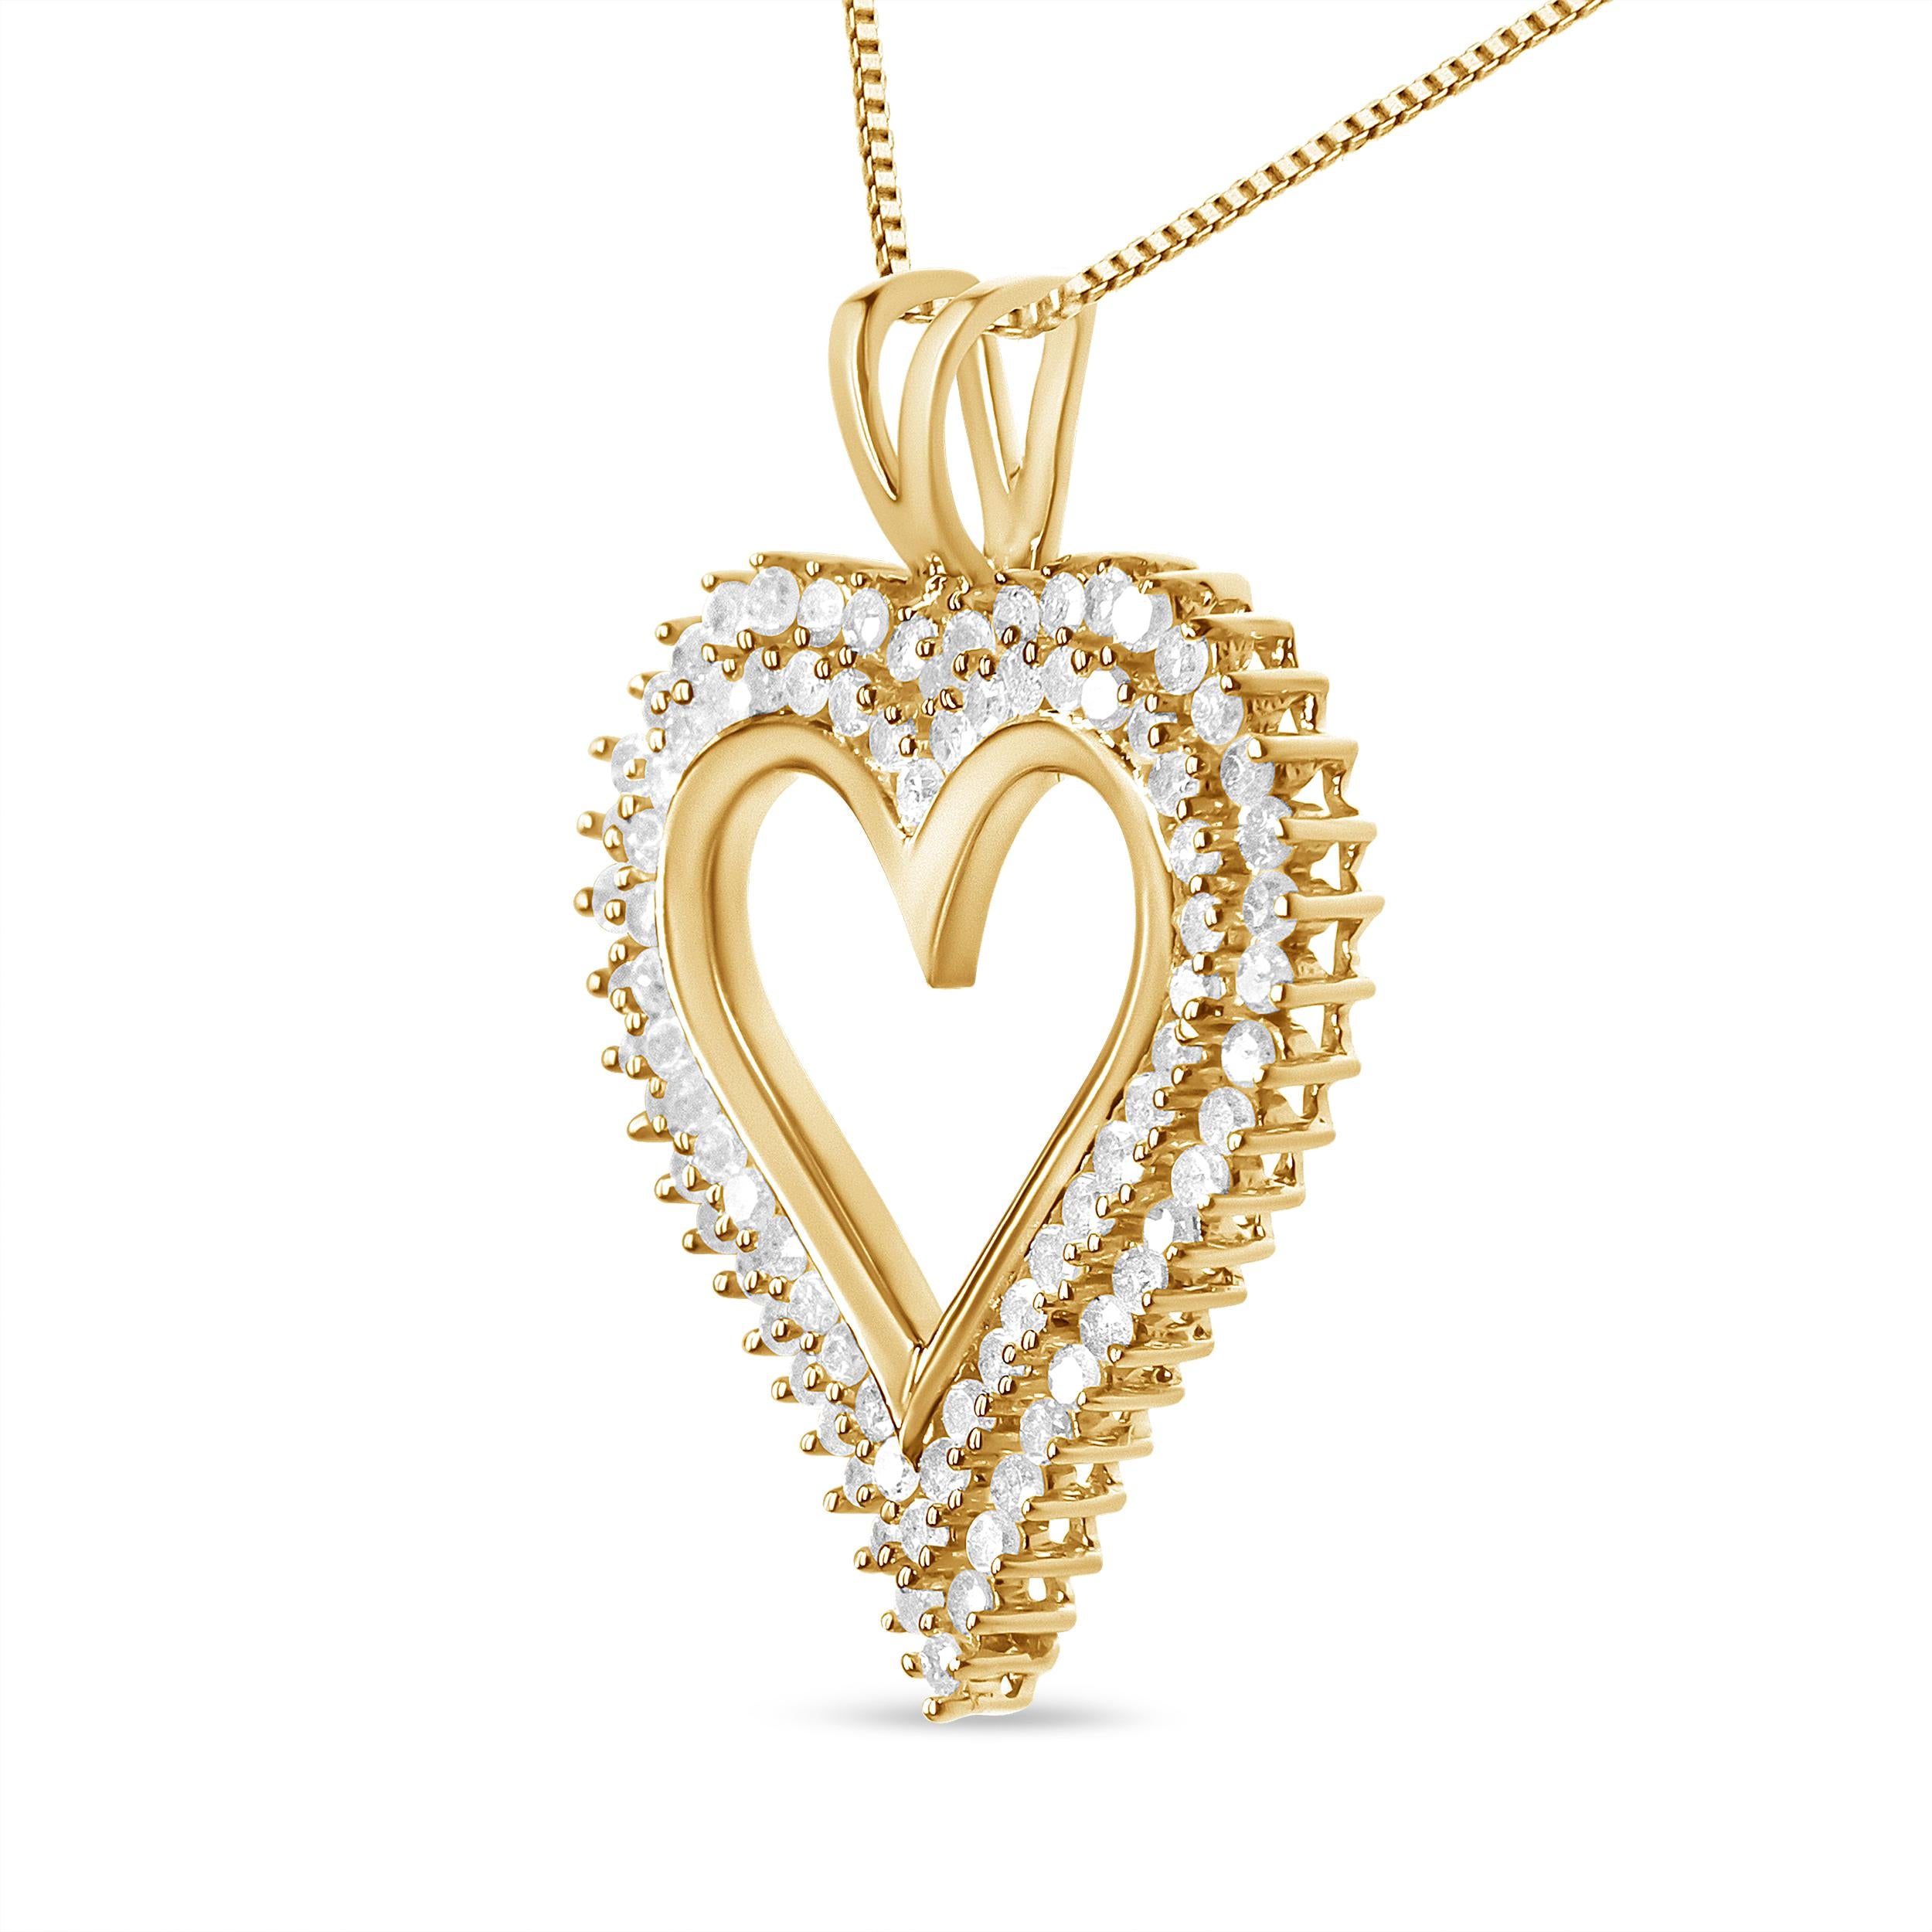 Modern 10k Yellow Gold Plated Sterling Silver 1.0 Carat Diamond Heart Pendant Necklace For Sale